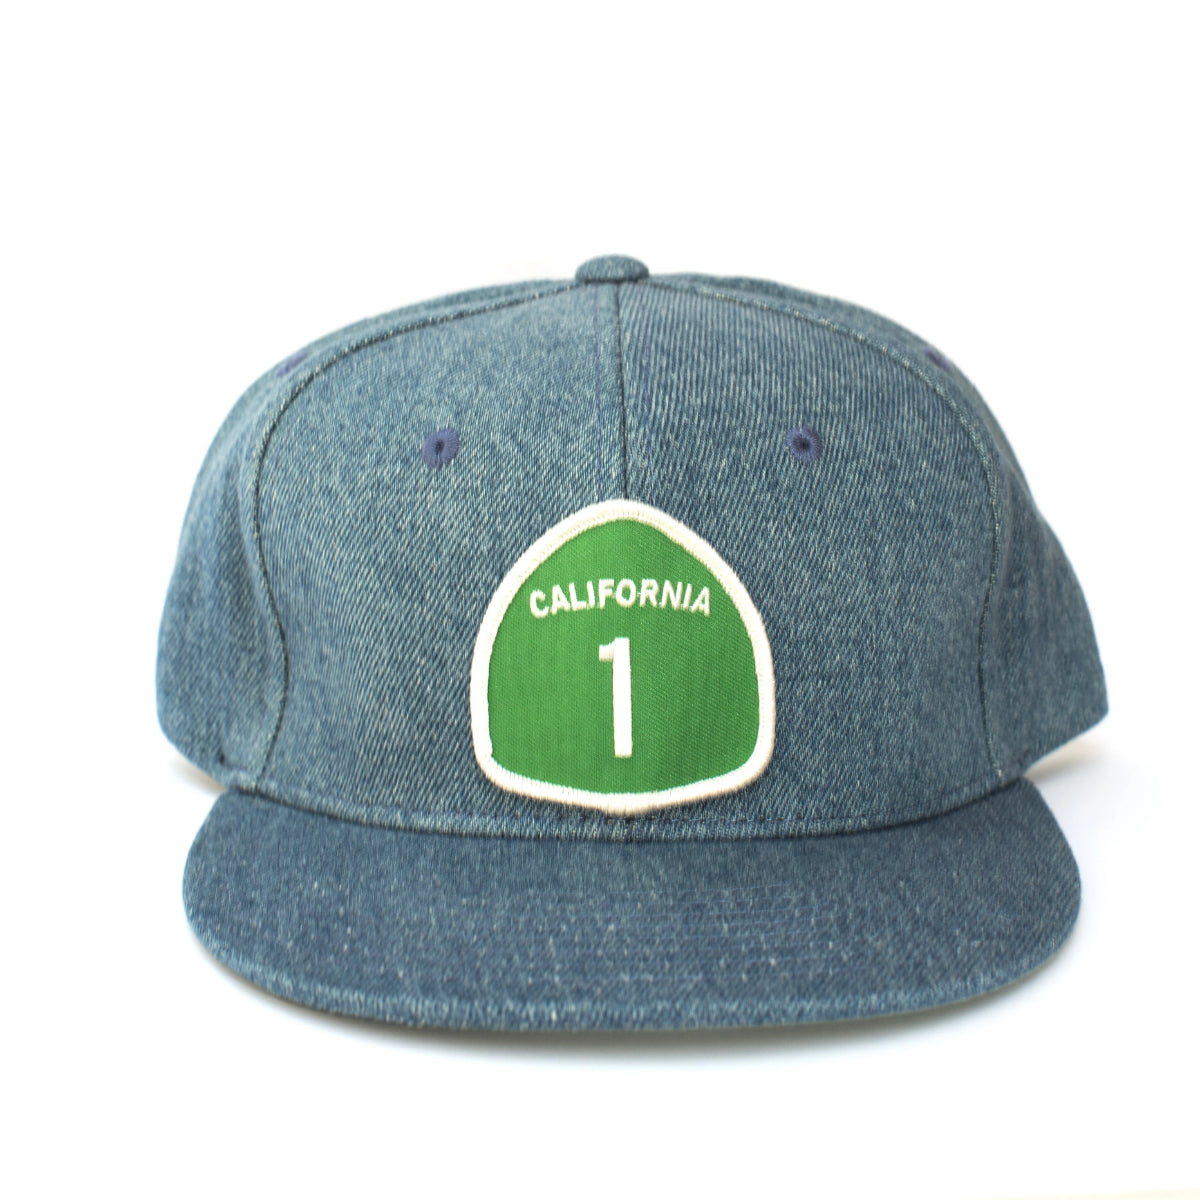 Highway 1 Patch Hats